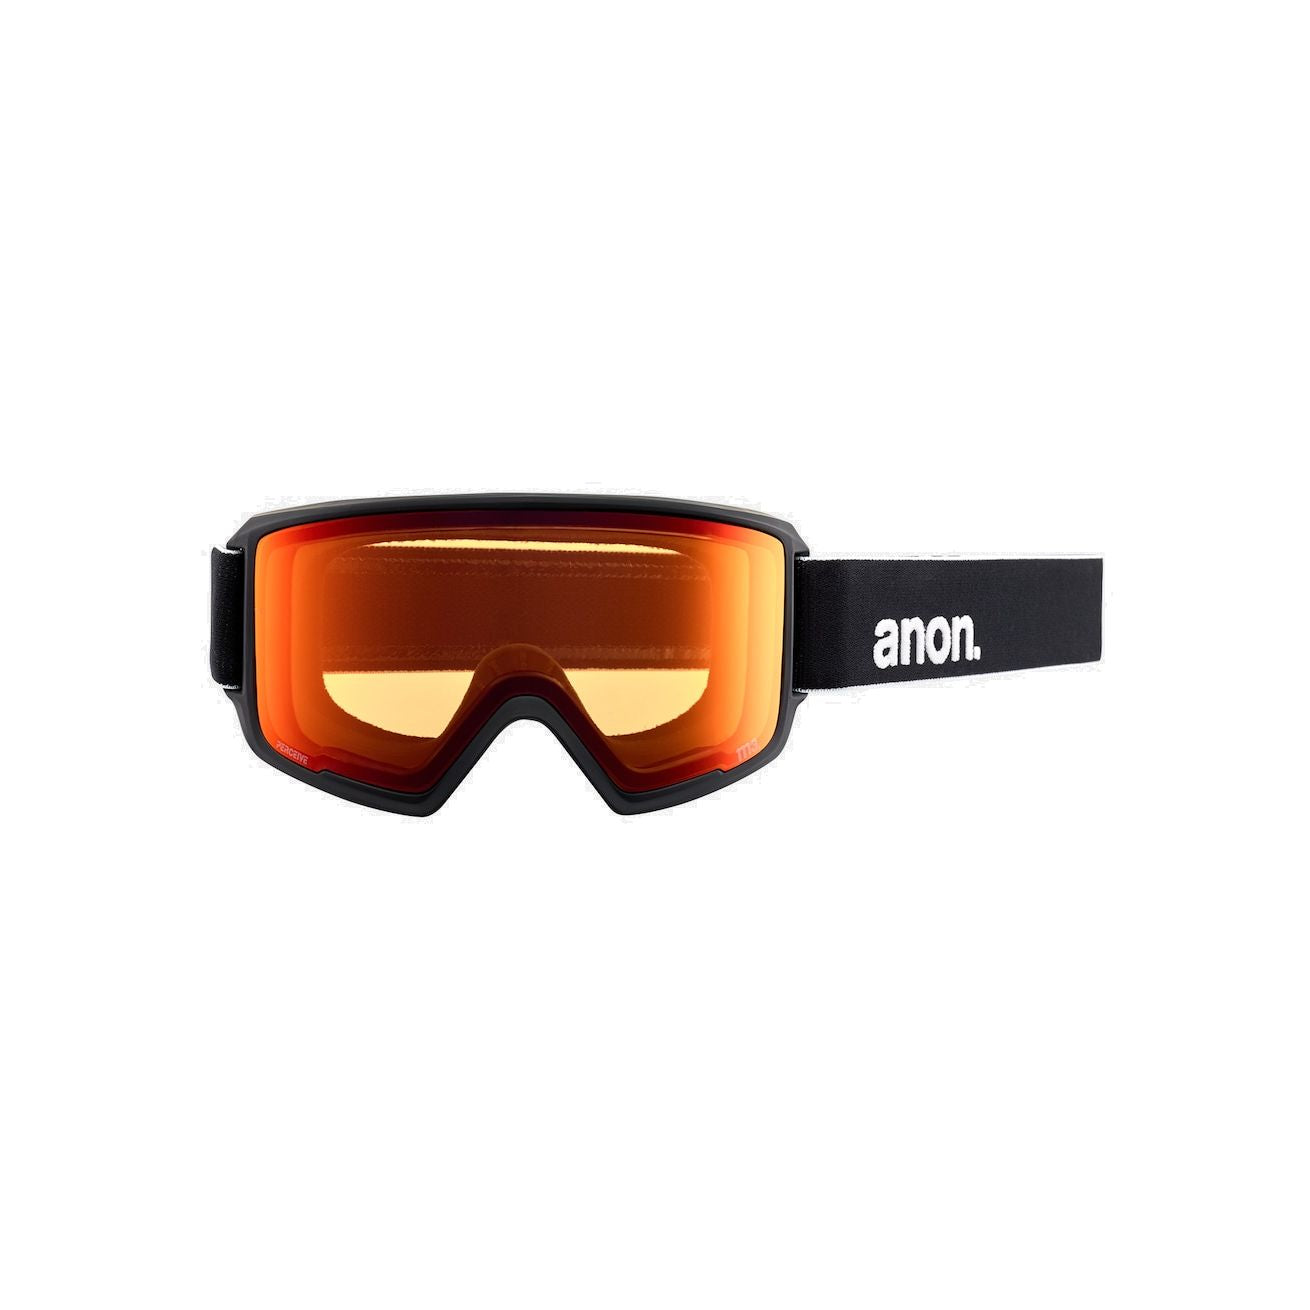 Anon M3 Goggles + Bonus Lens + MFI Face Mask - Low Bridge Fit Black / Perceive Sunny Red / Perceive Sunny Red (14% / S3) Snow Goggles